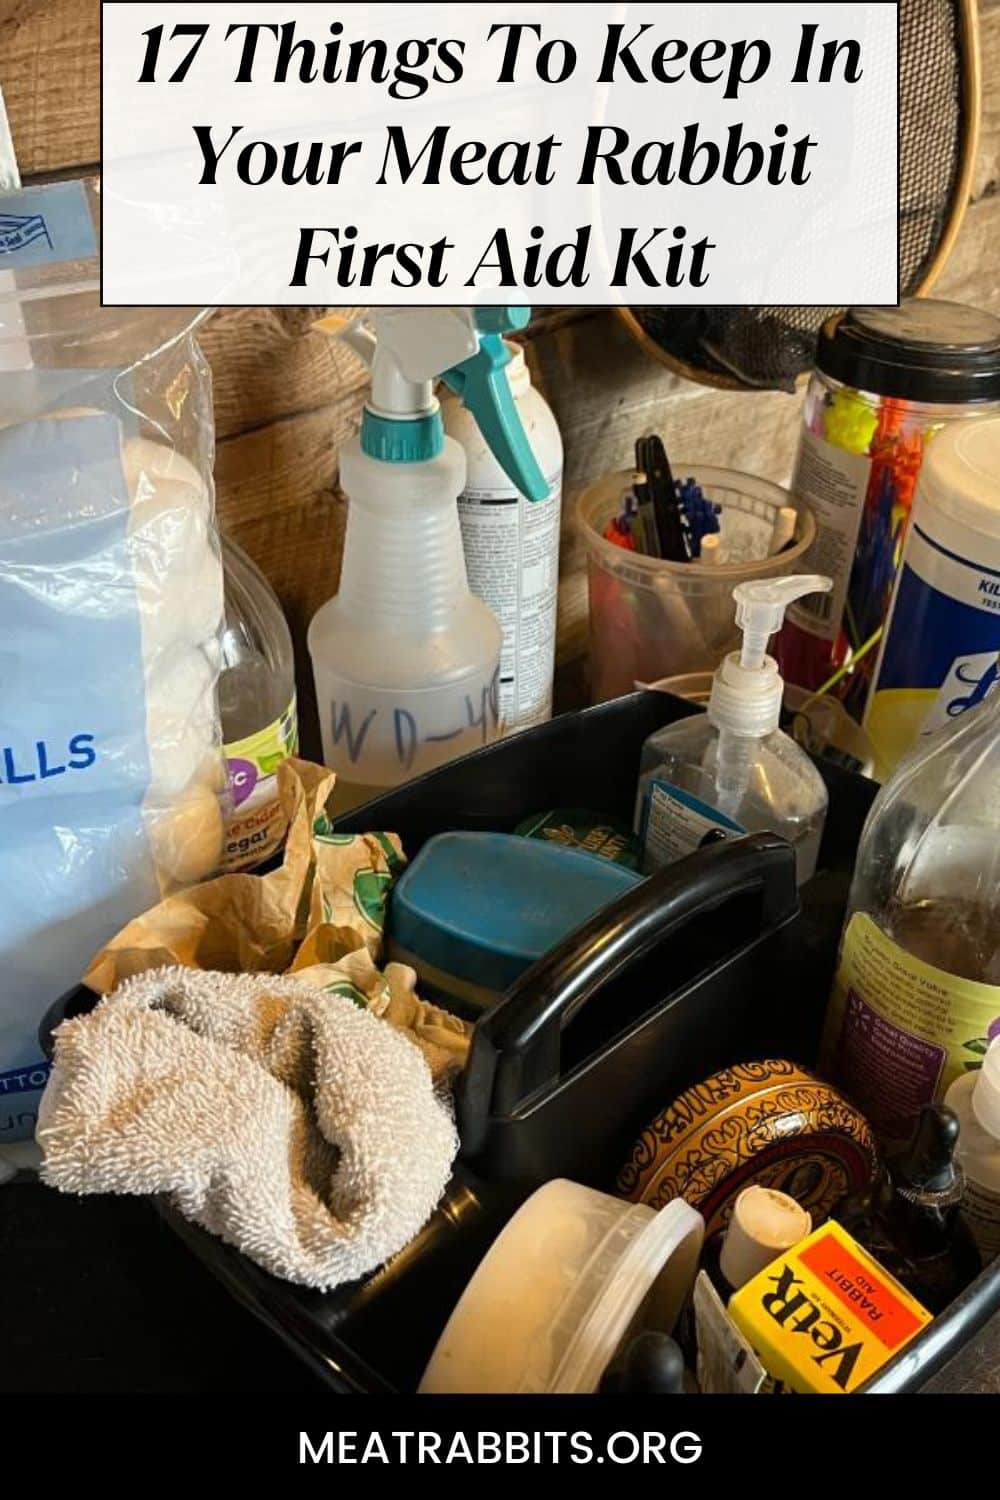 17 Things To Keep In Your Meat Rabbit First Aid Kit pinterest image.